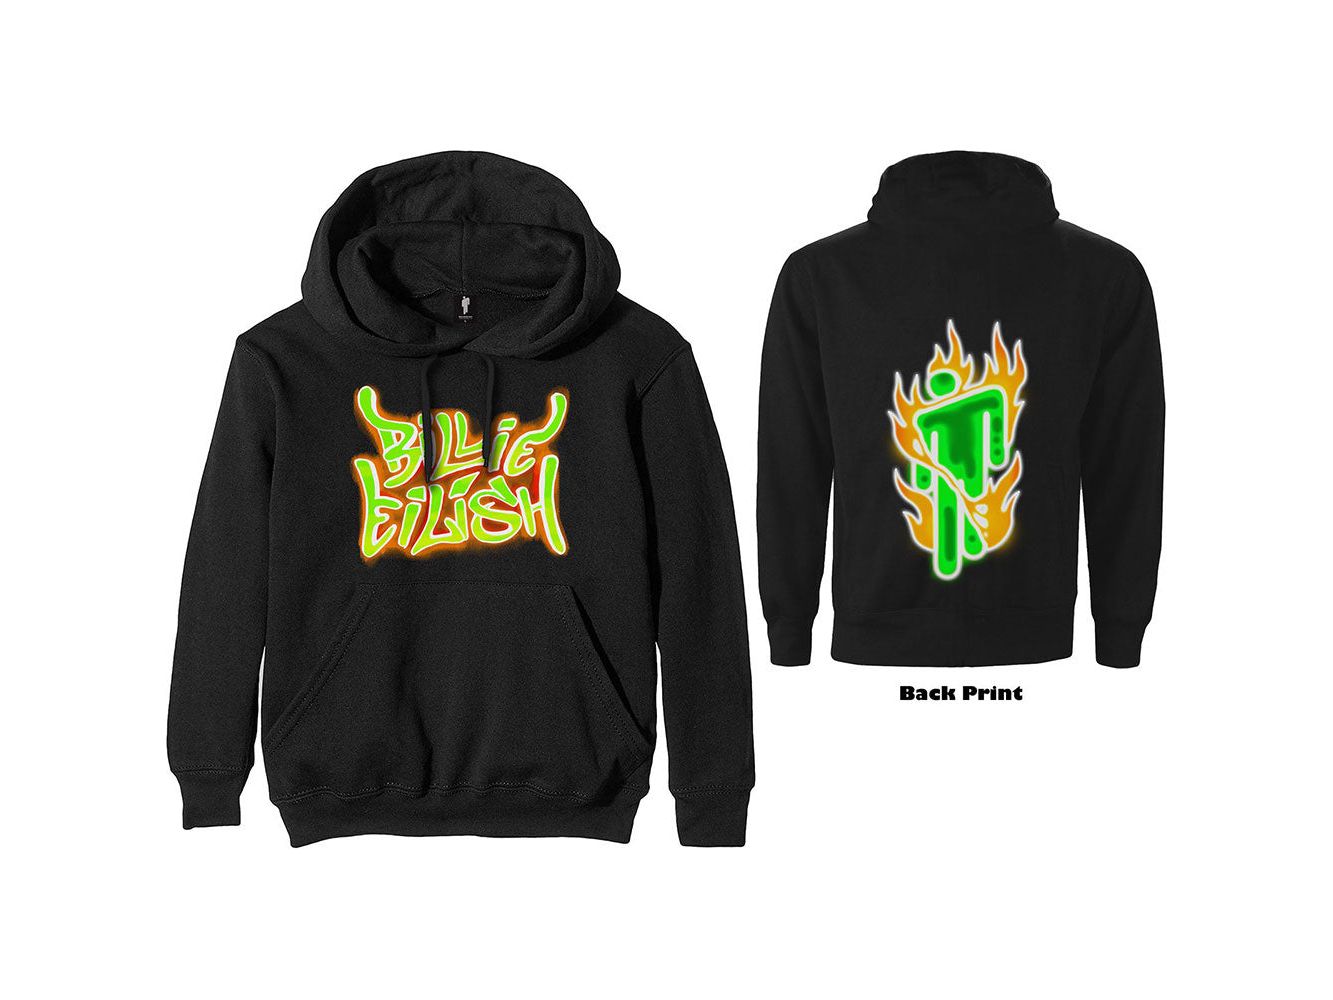 Billie Eilish Unisex Pullover Hoodie featuring the 'Airbrush Flames Blohsh'